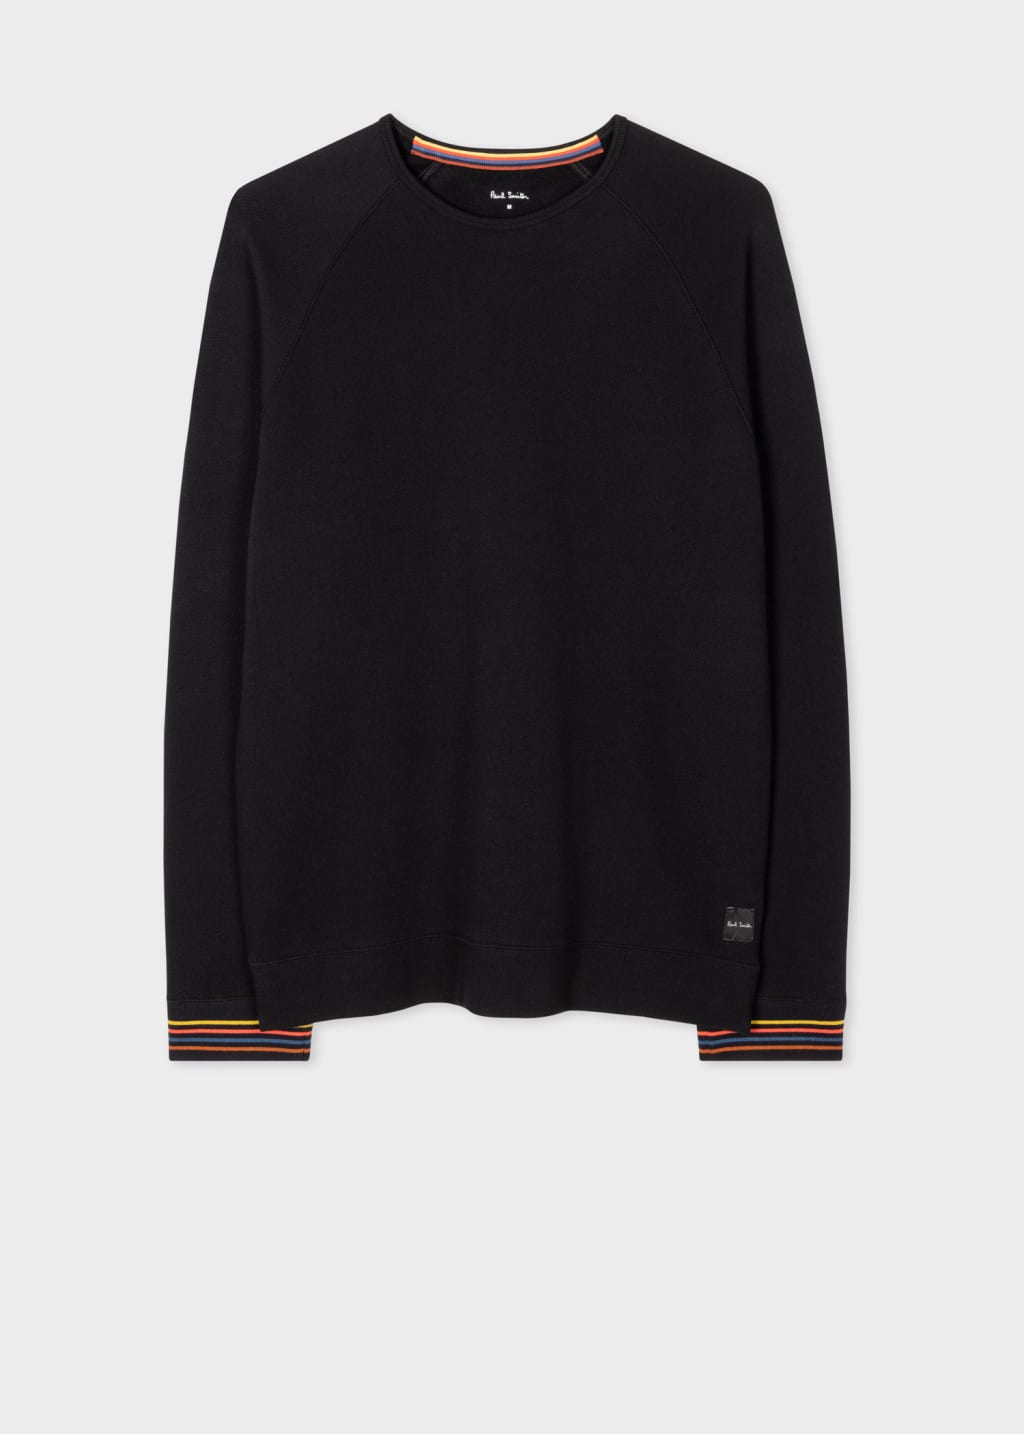 Front View - Black Cotton 'Artist Stripe' Cuff Long-Sleeve Lounge Top Paul Smith